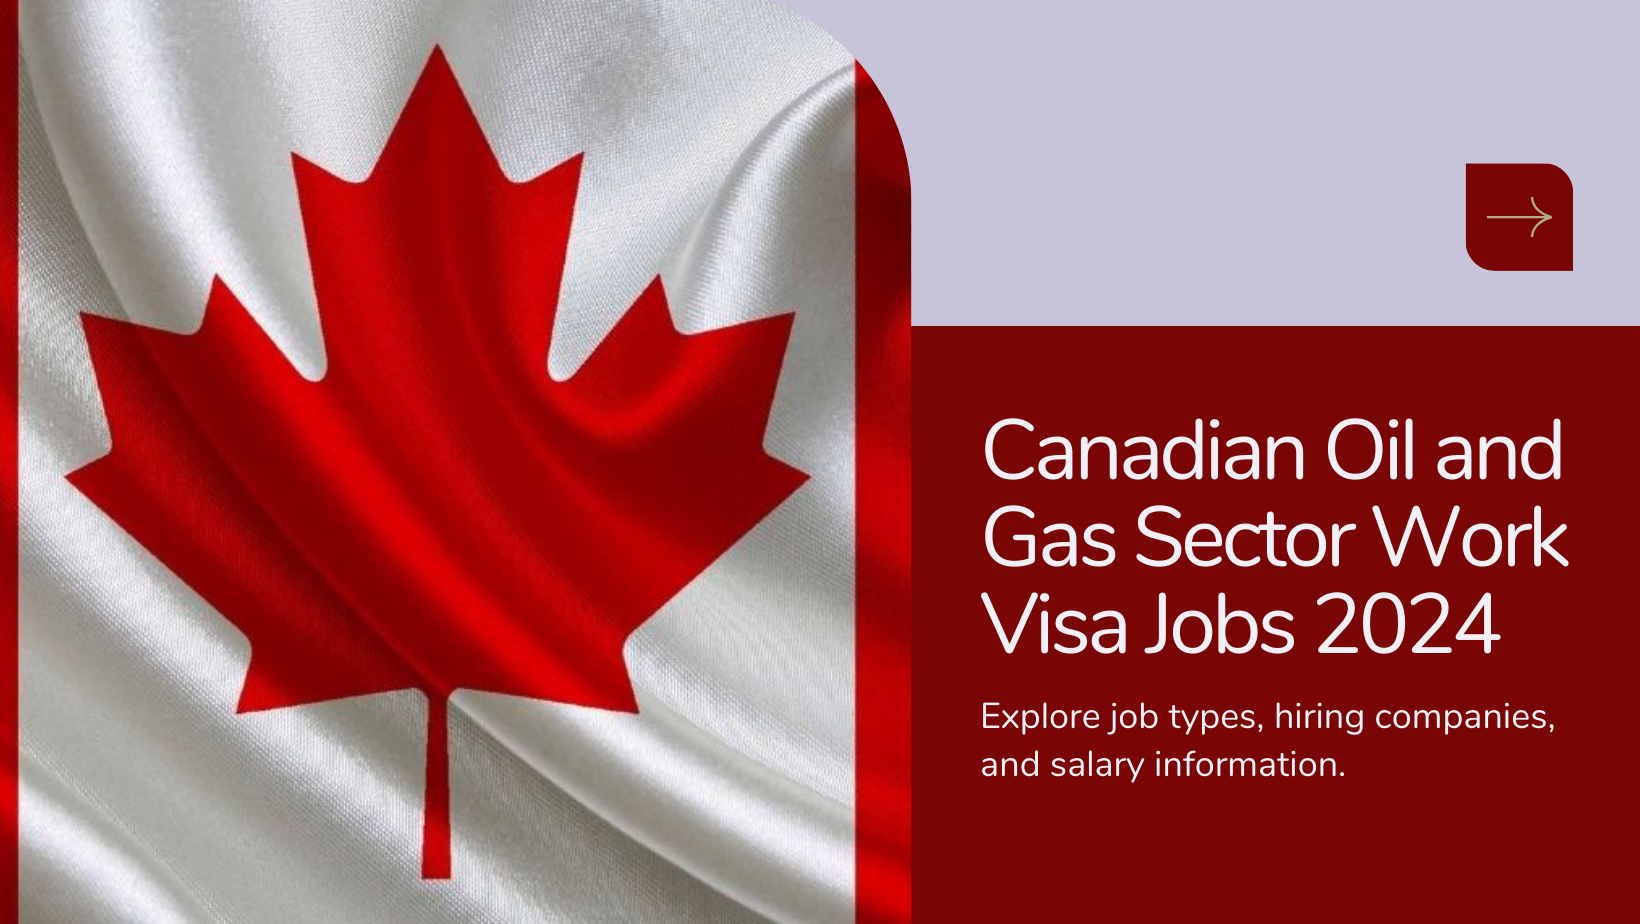 Canadian Oil and Gas Sector Work Visa Jobs in 2024 Job Types, Hiring Companies and Salaries